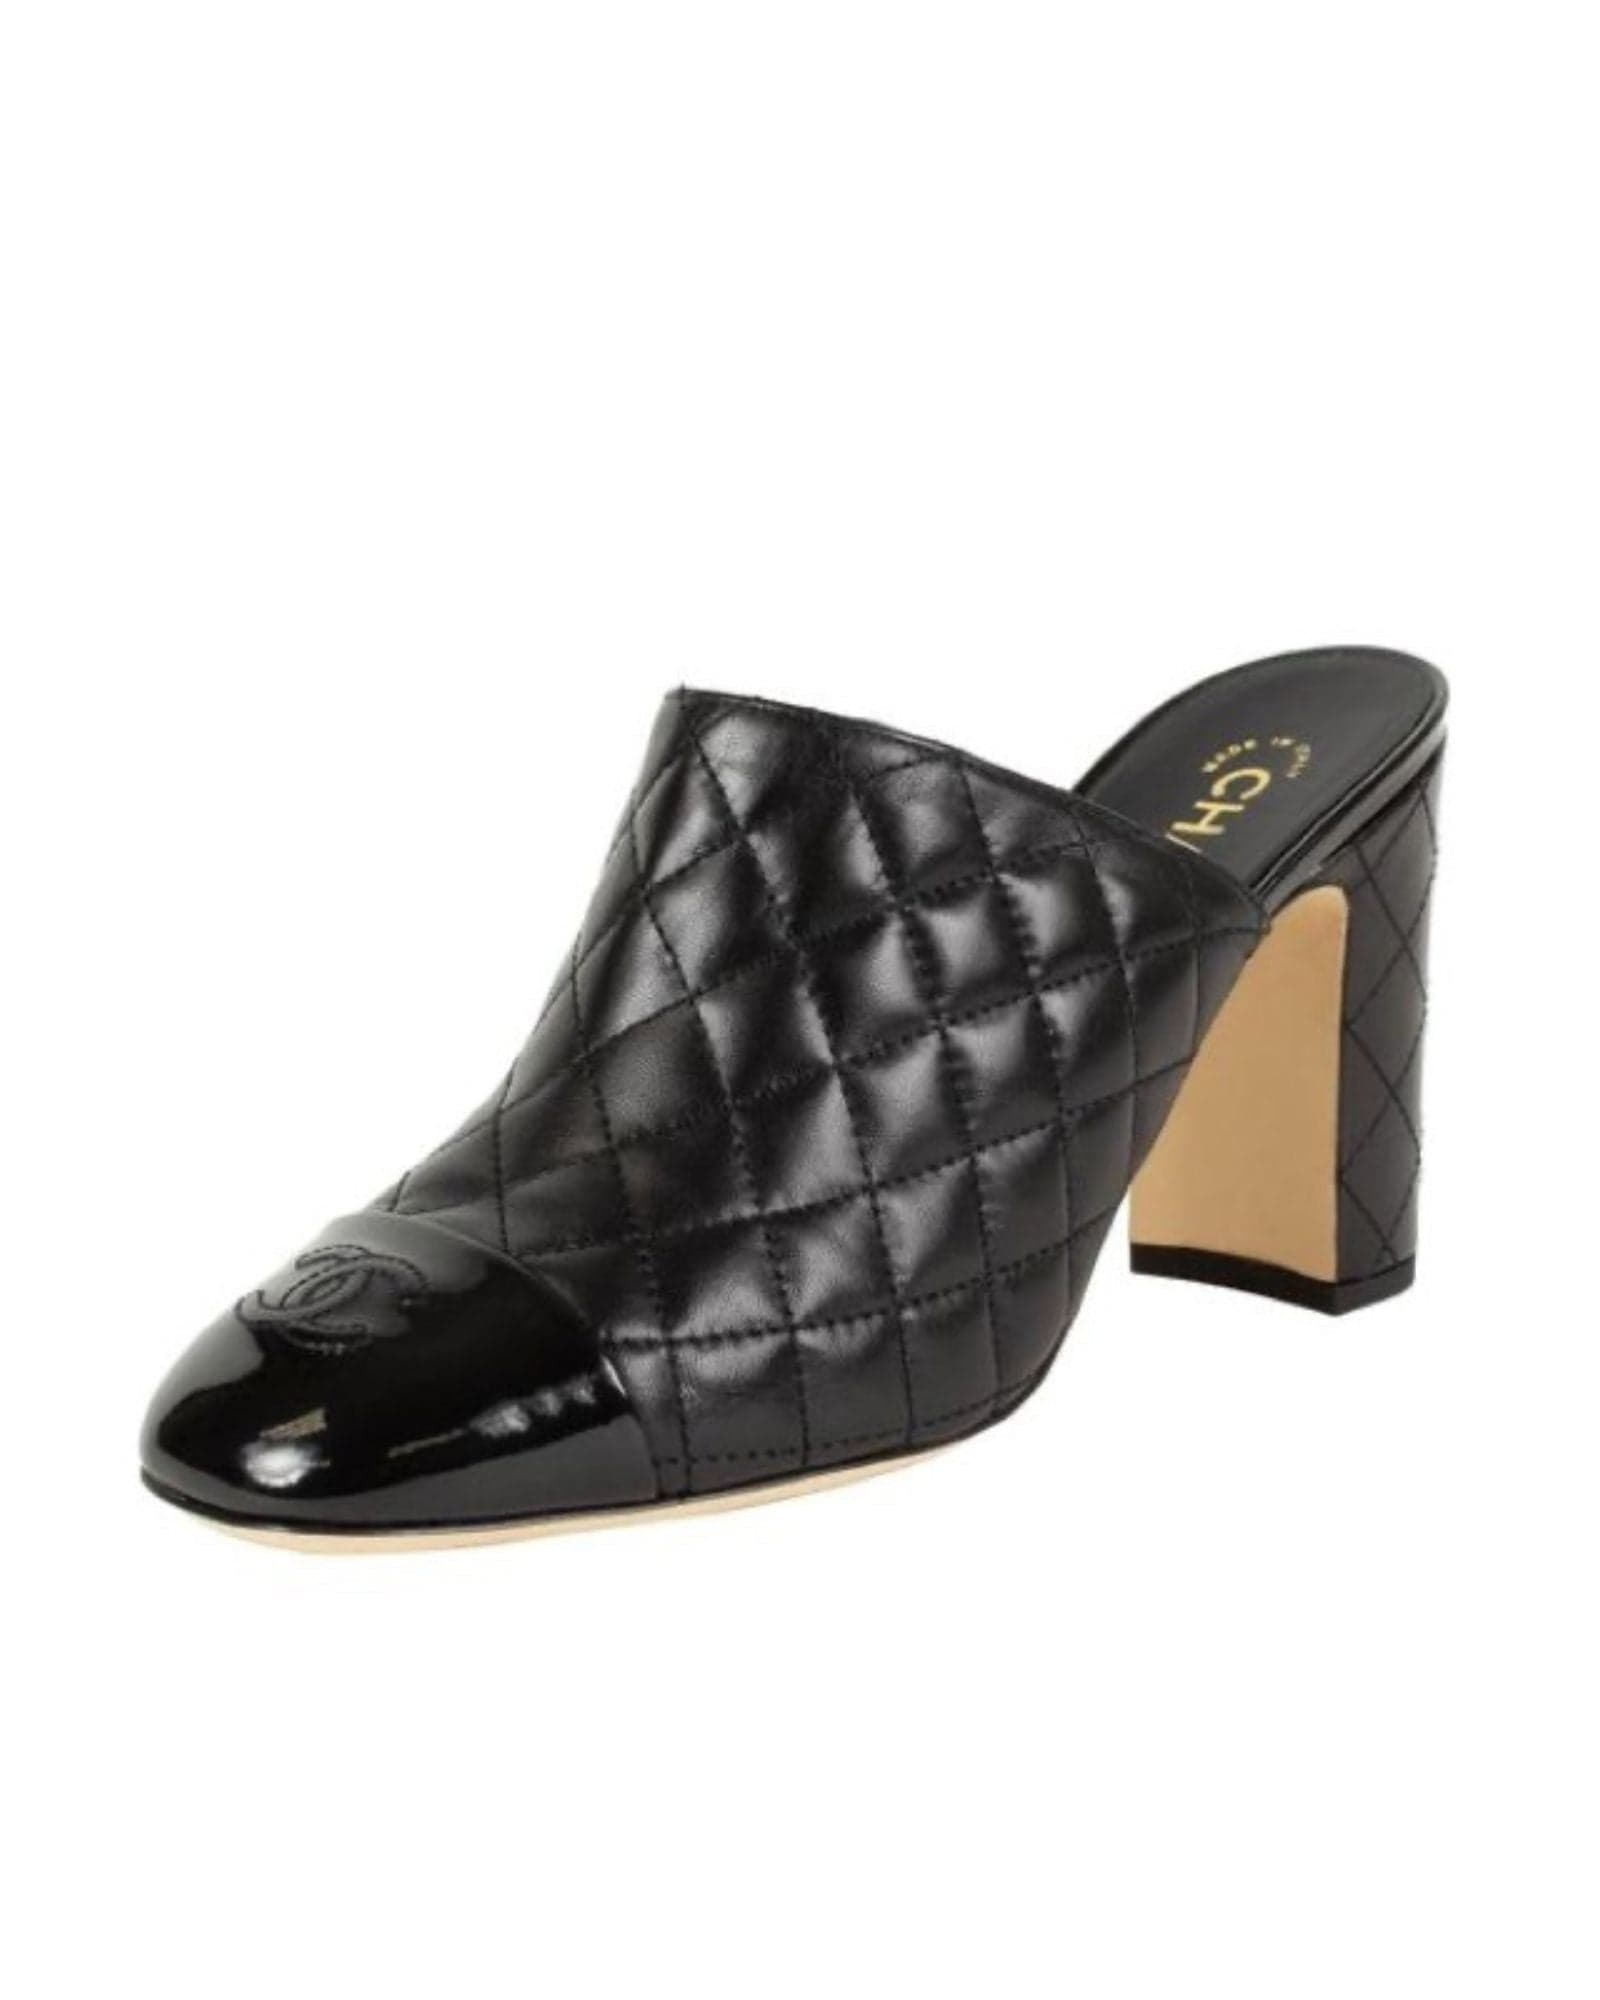 Shop CHANEL 2023 SS CHANEL ☆mule ☆G39954 X56940 0S859 by